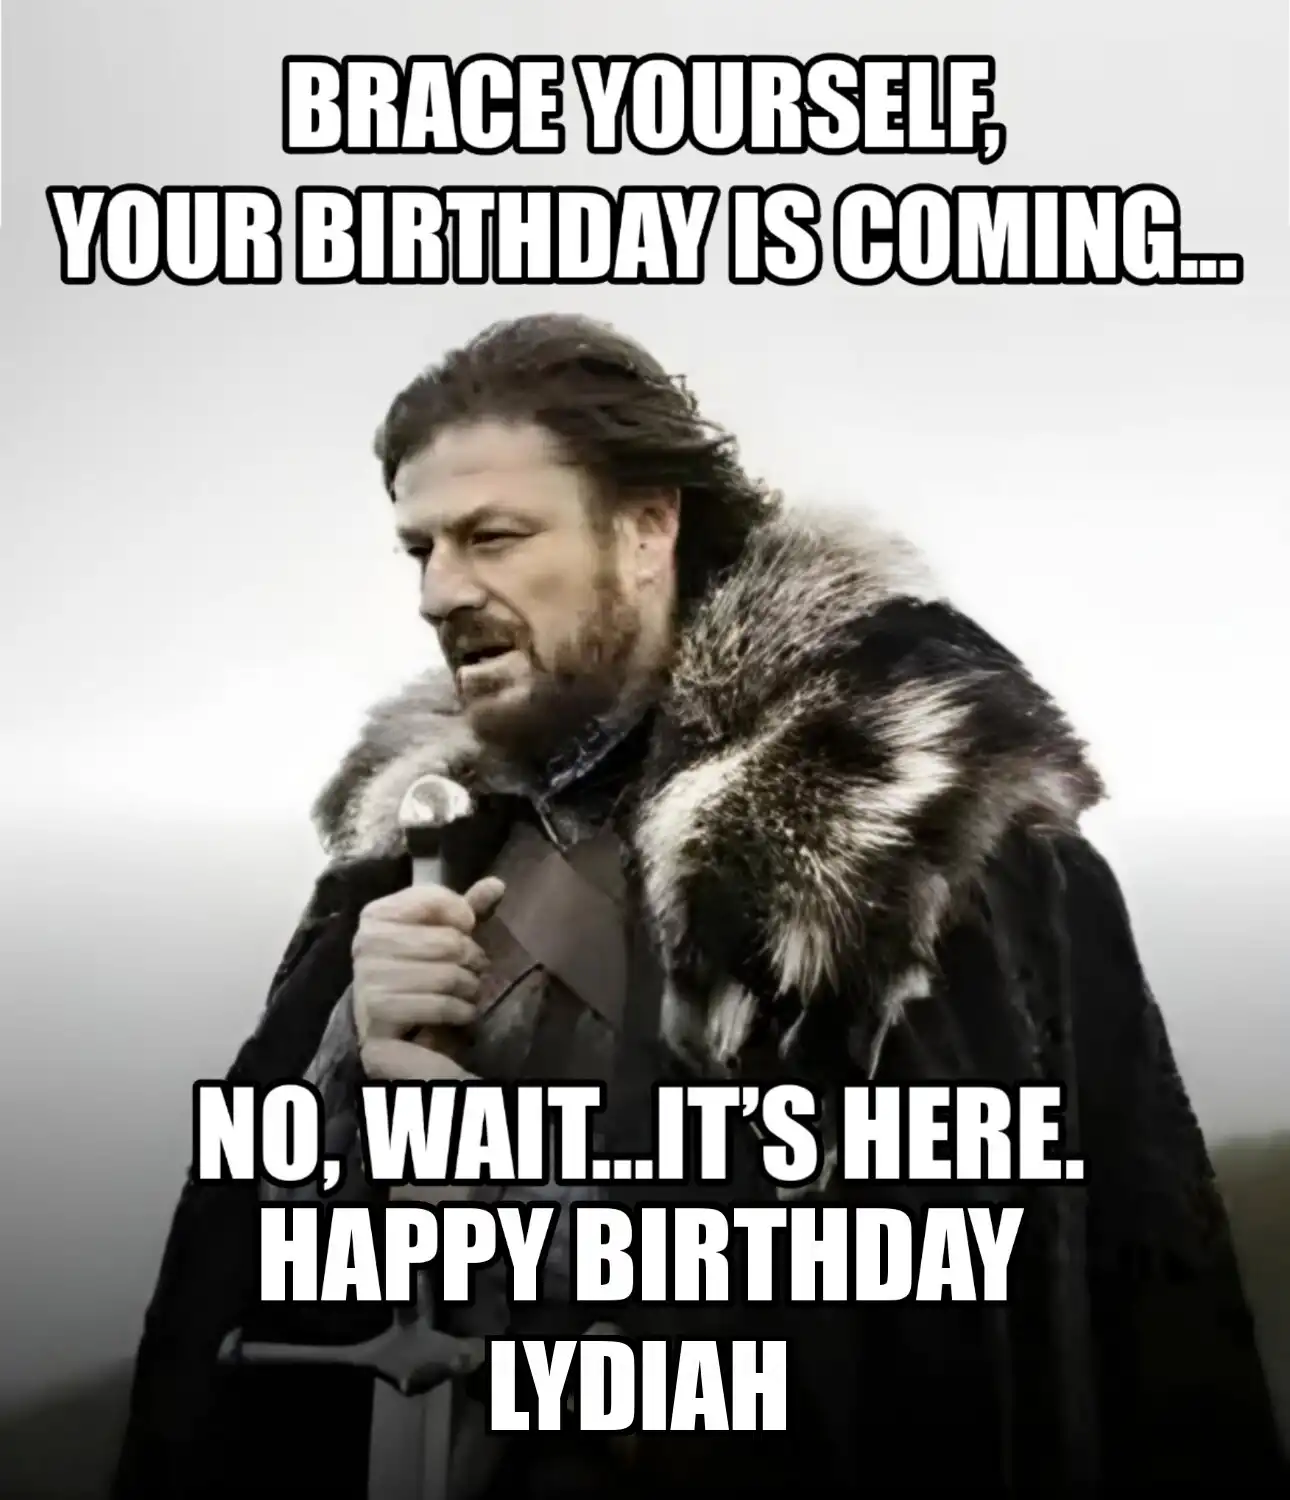 Happy Birthday Lydiah Brace Yourself Your Birthday Is Coming Meme